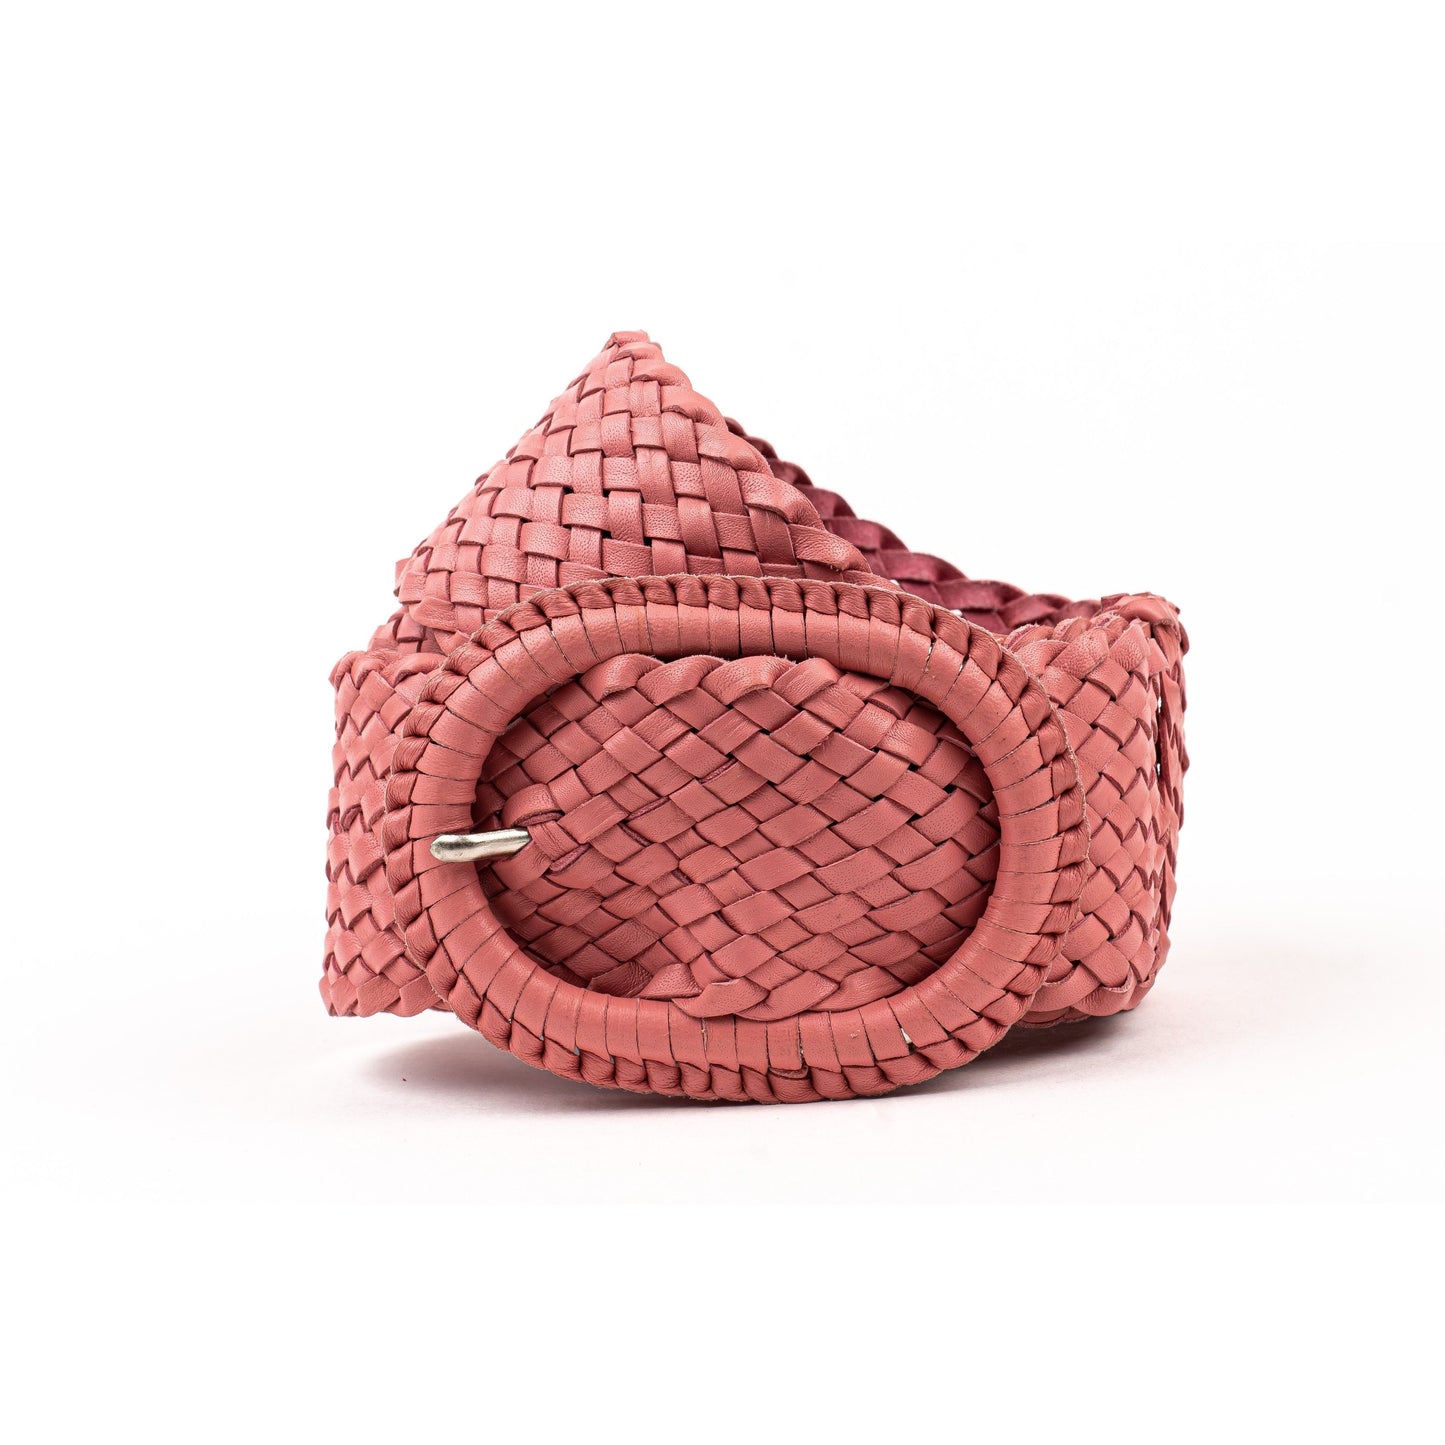 Woven pink leather belt coiled.